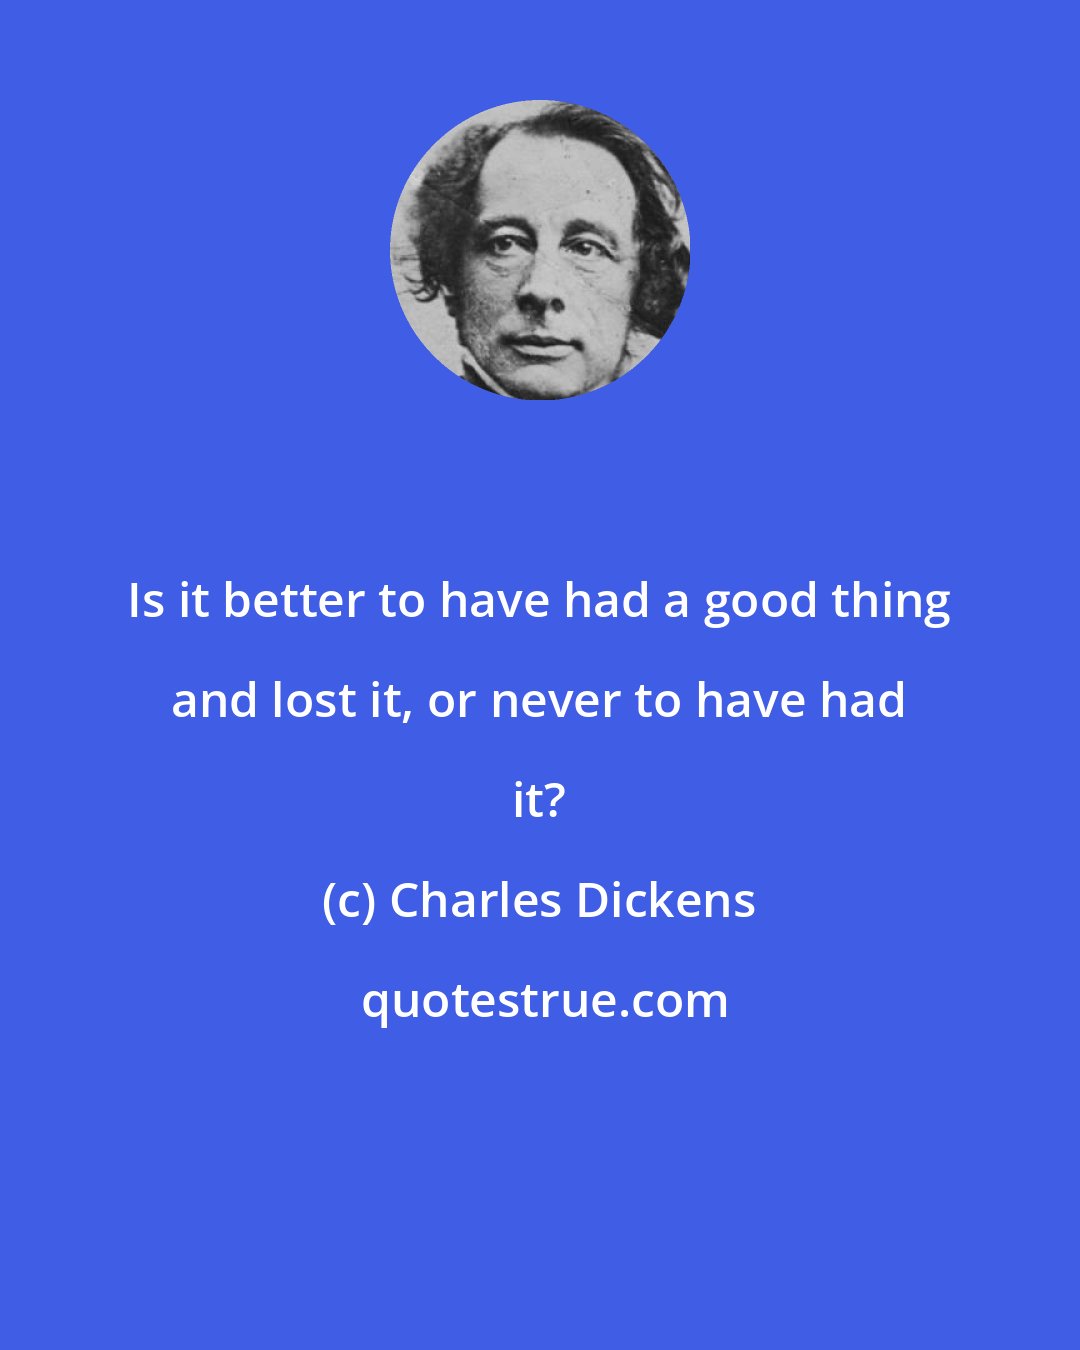 Charles Dickens: Is it better to have had a good thing and lost it, or never to have had it?